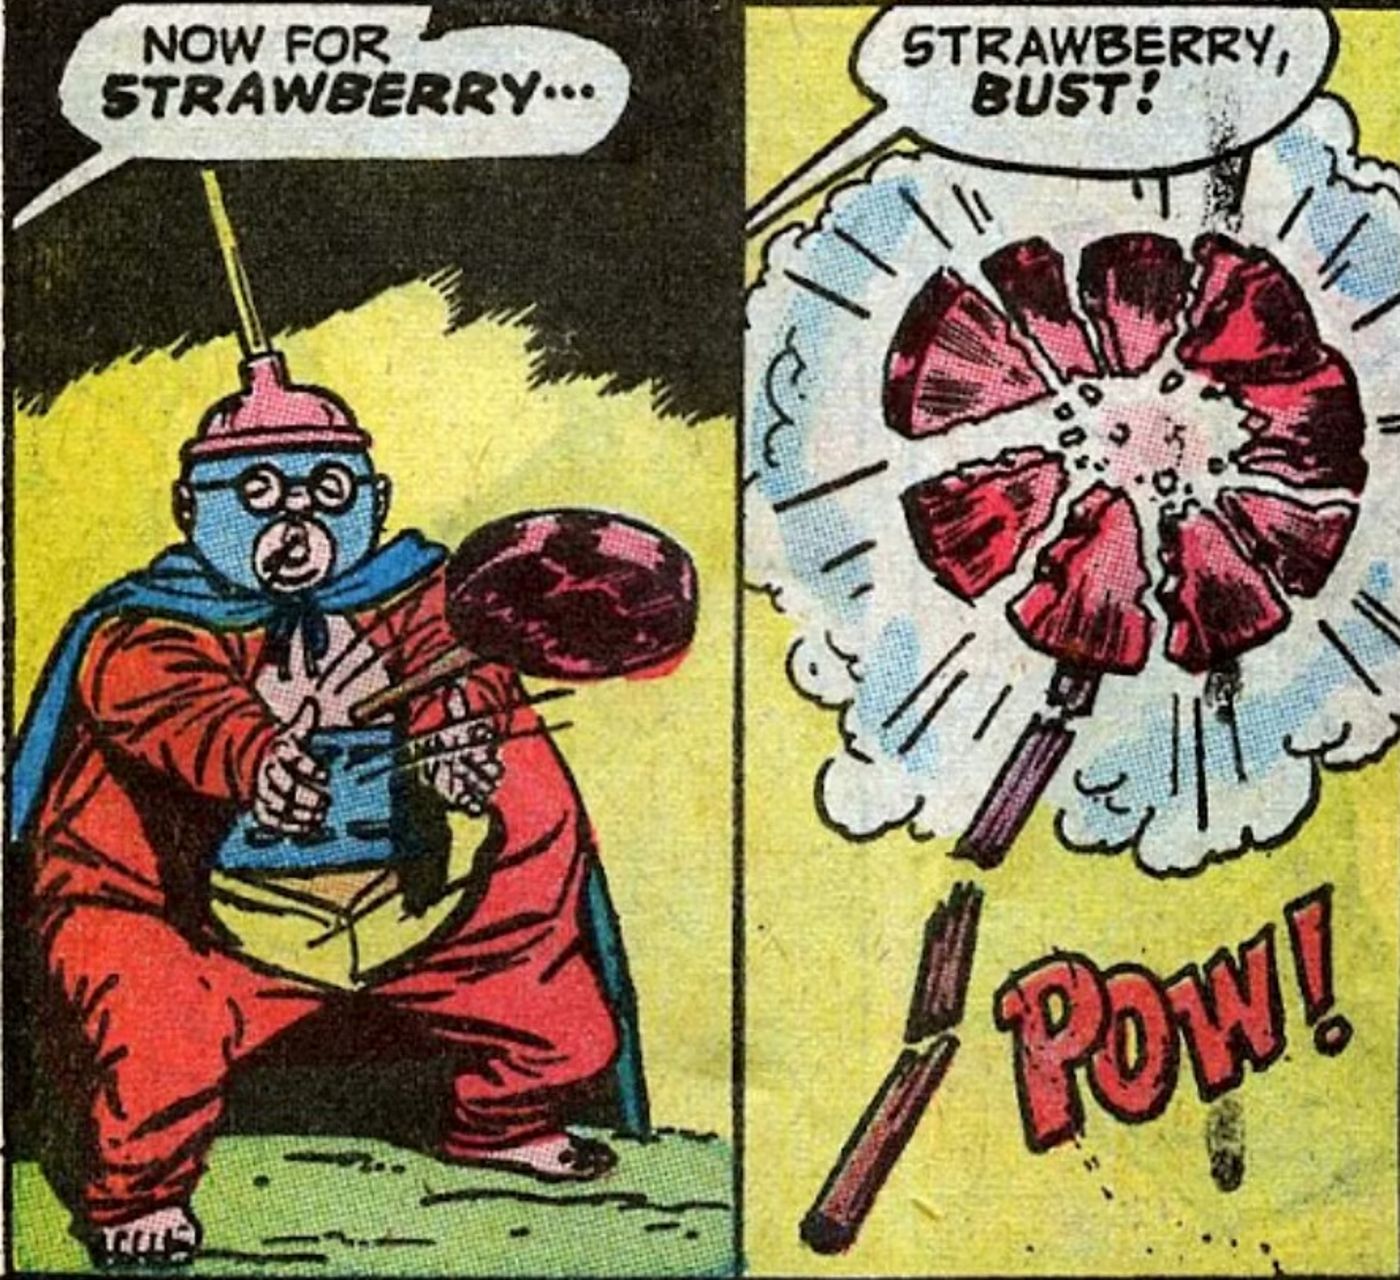 Herbie's superpower-granting strawberry lollipop is pulled out of his hands and destroyed